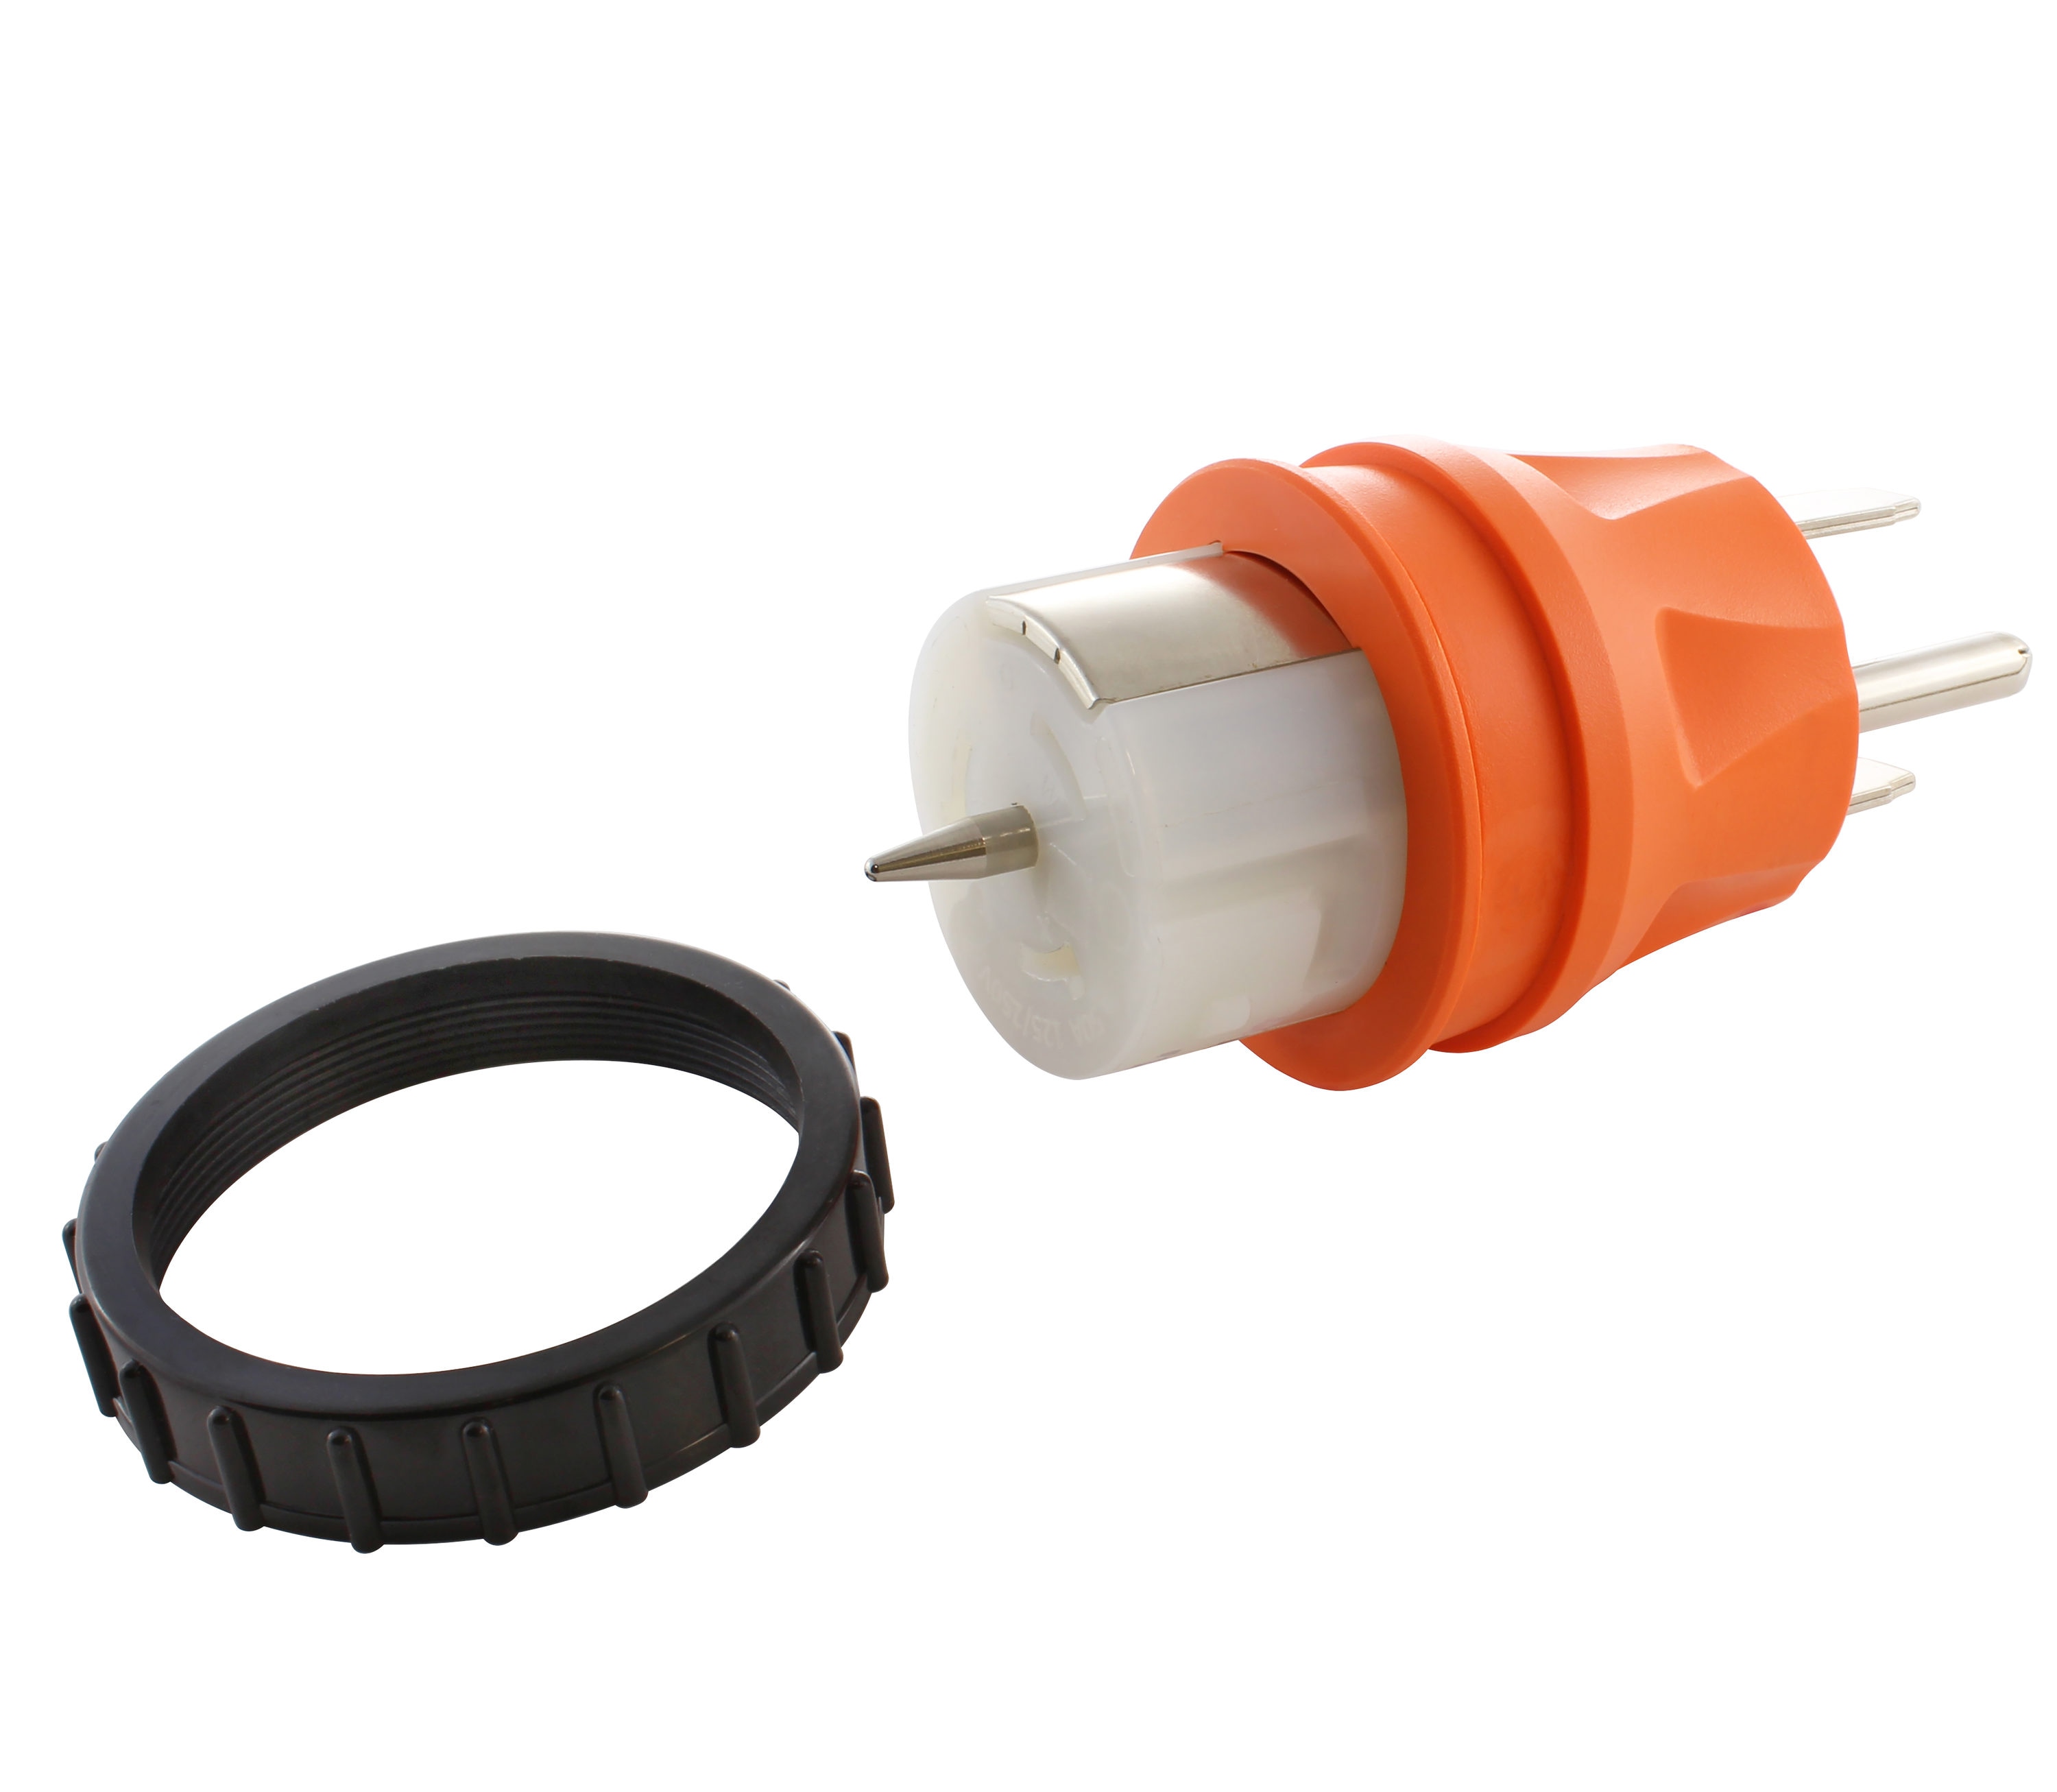 CS6361C (Plug) x 14-50R (4-Prong) Adapter (50 Amp, 120 Volt, 1' 10/3 Wire  AWG, SOOW Jacket)